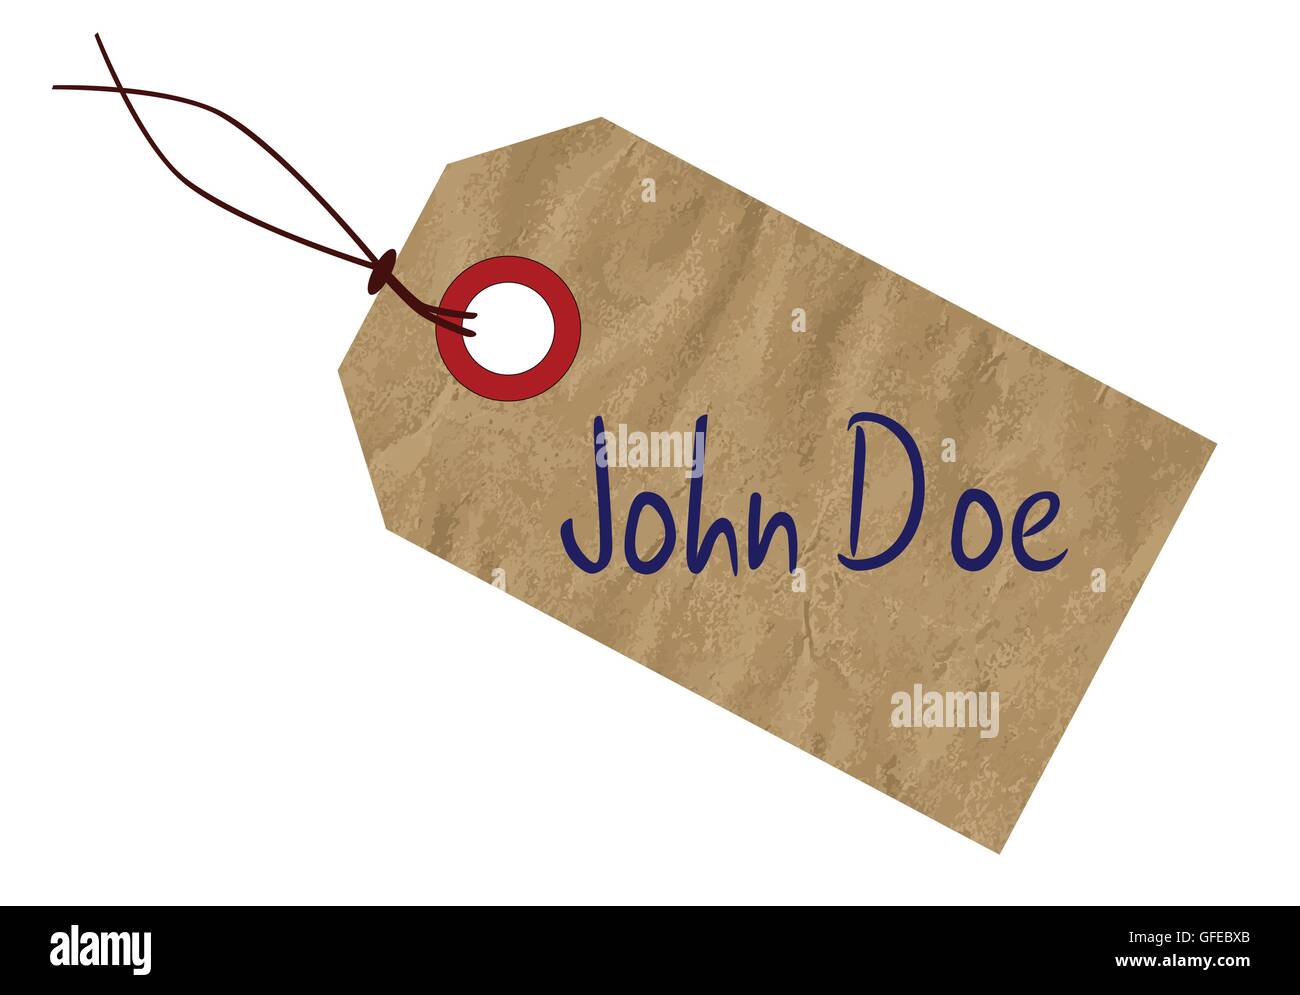 A John Doe brown paper tag over a white background Stock Vector